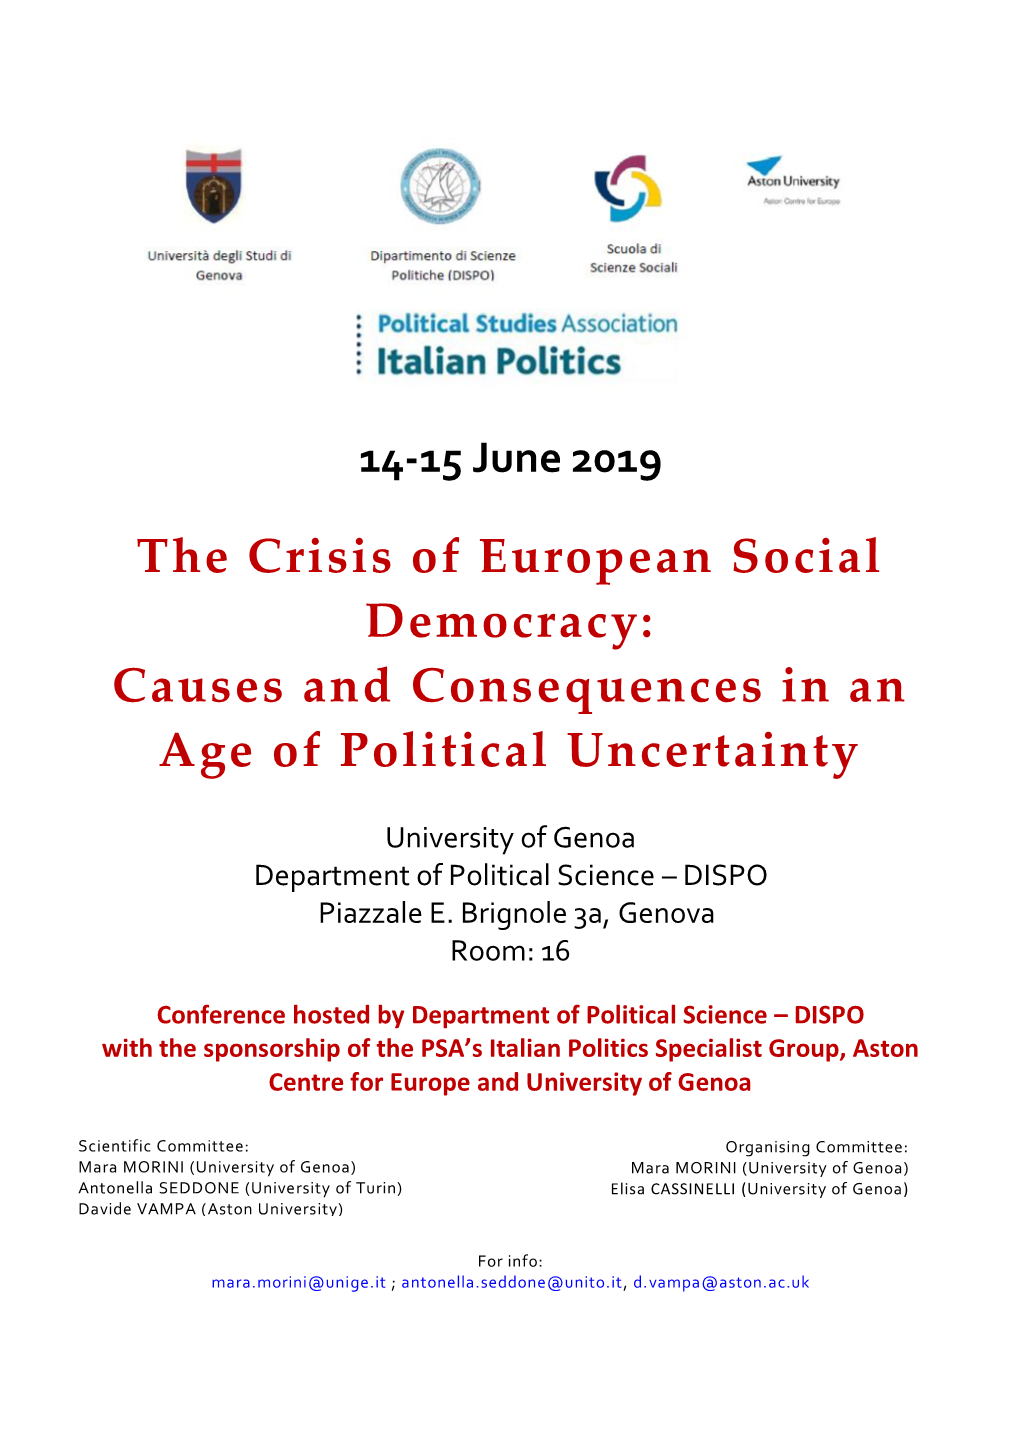 The Crisis of European Social Democracy: Causes and Consequences in an Age of Political Uncertainty